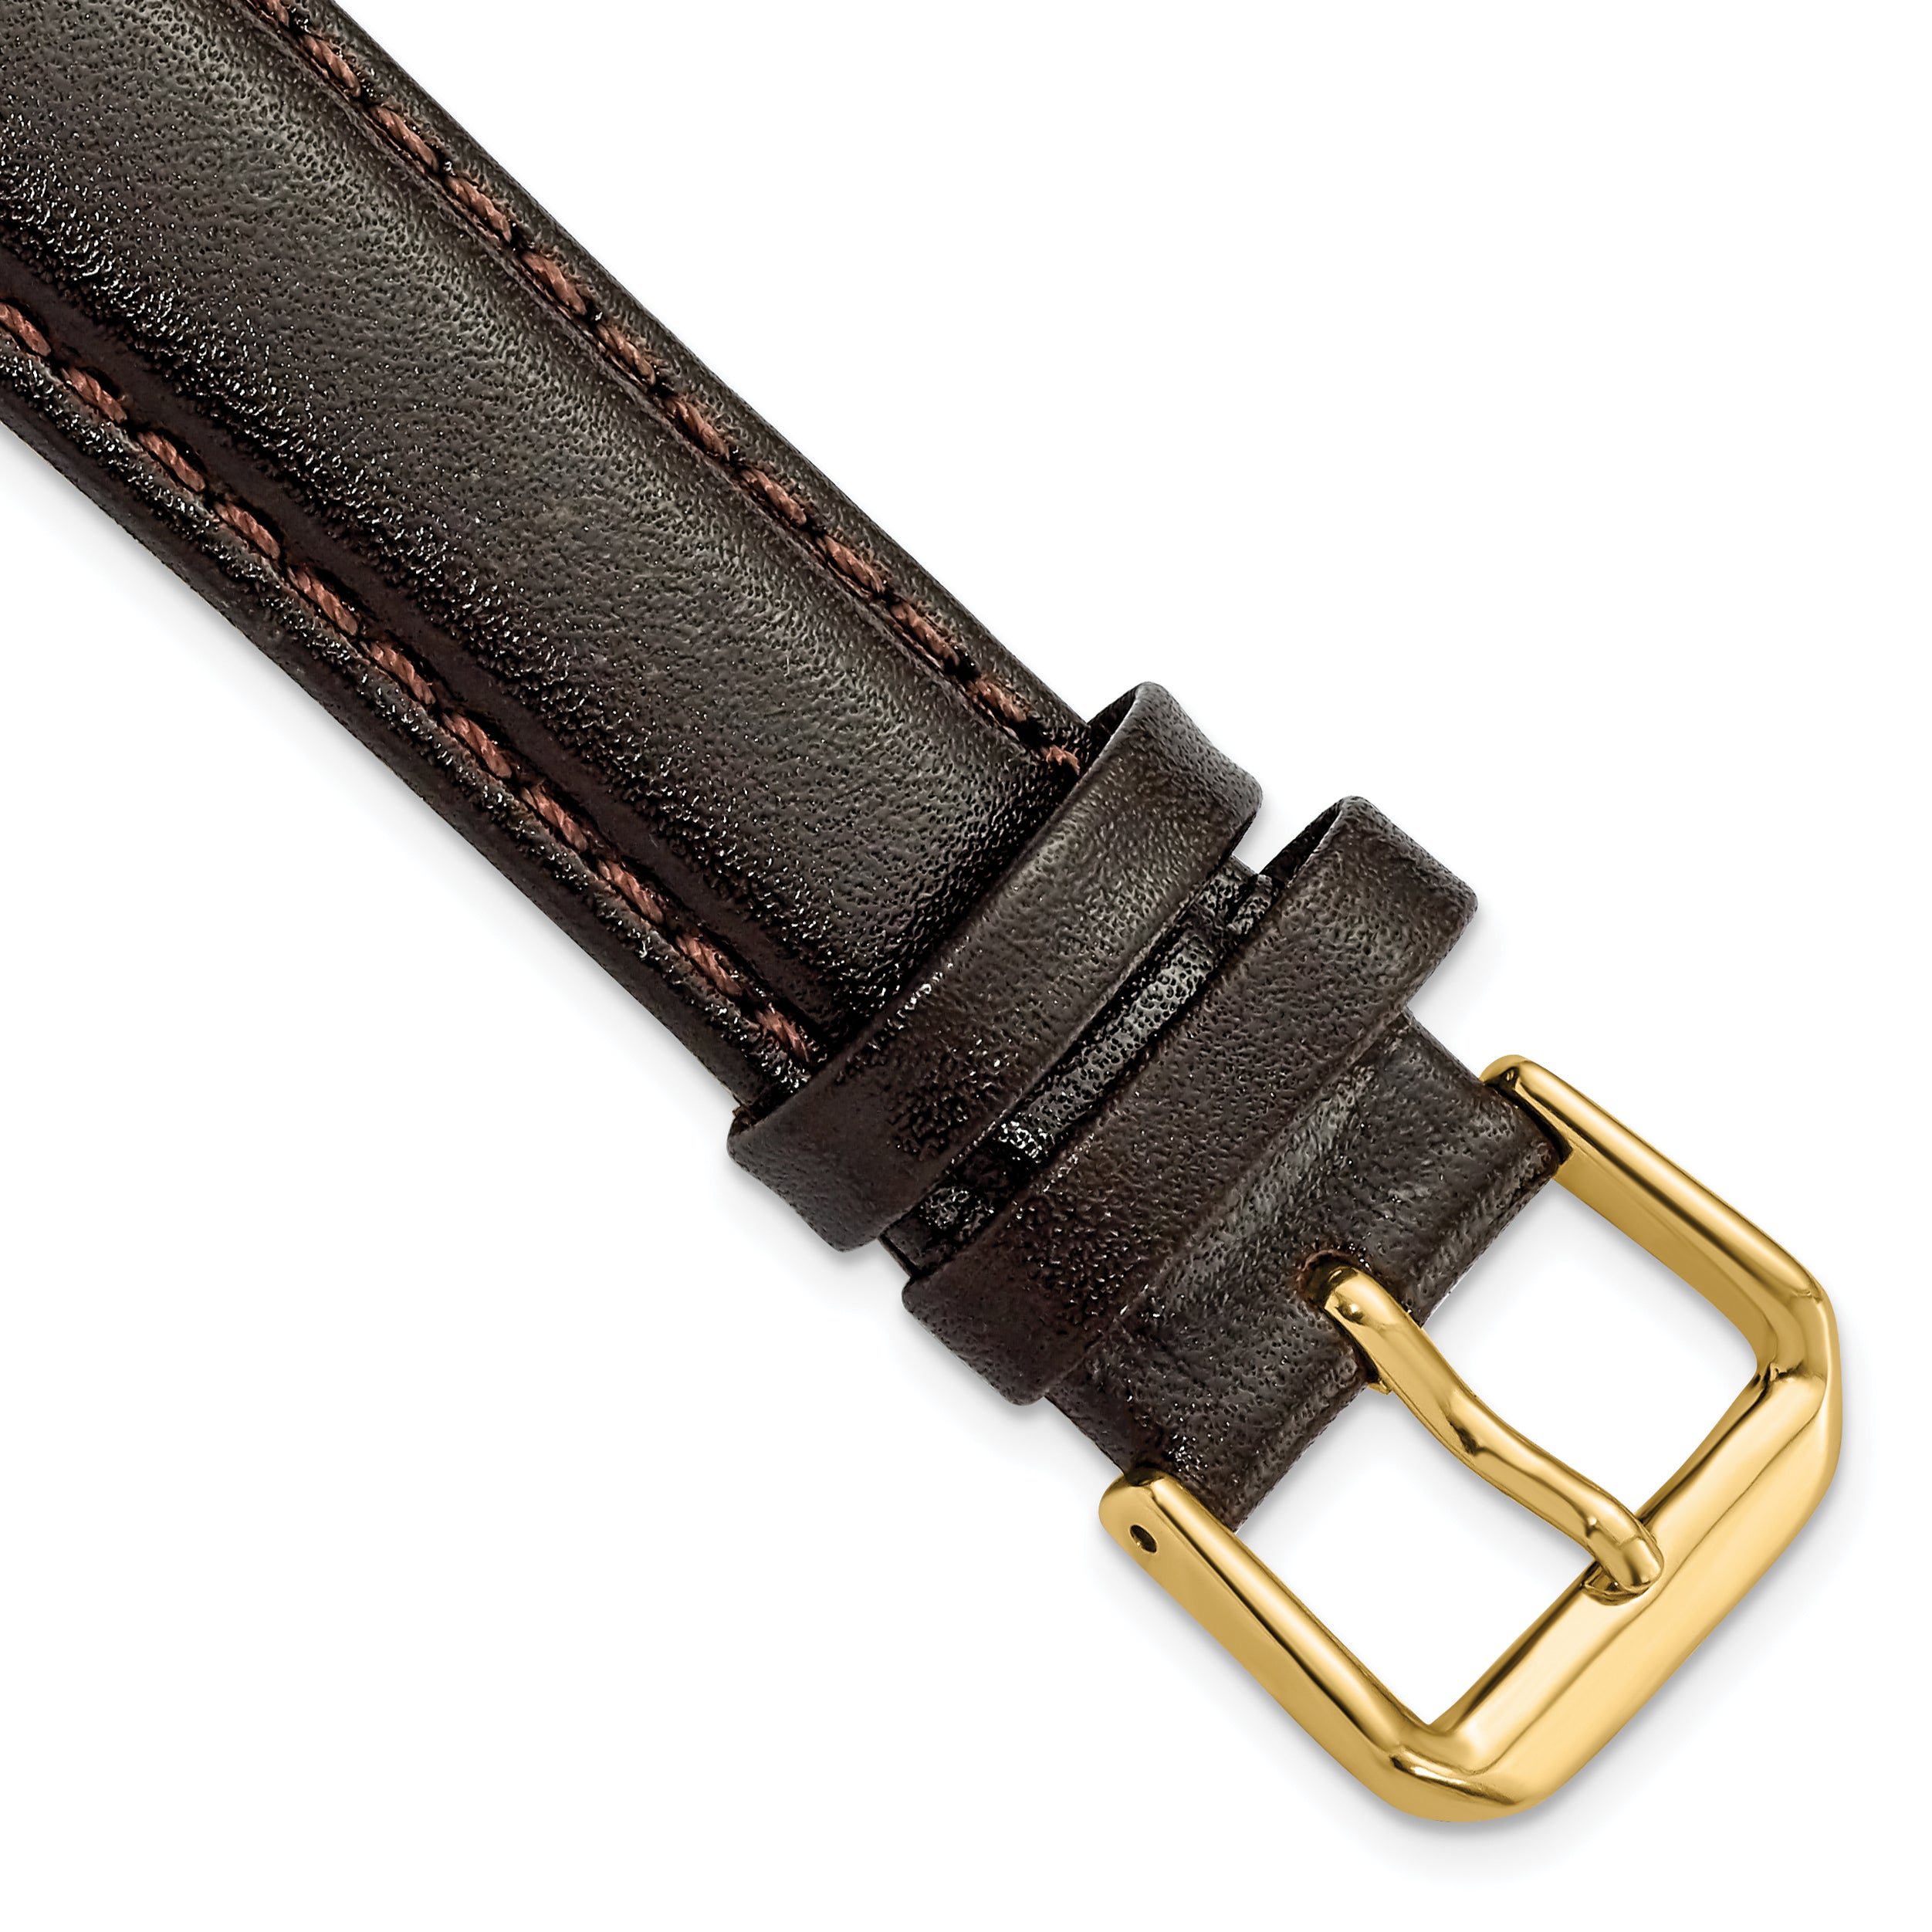 DeBeer 19mm Long Dark Brown Smooth Leather with Gold-tone Buckle 8.5 inch Watch Band